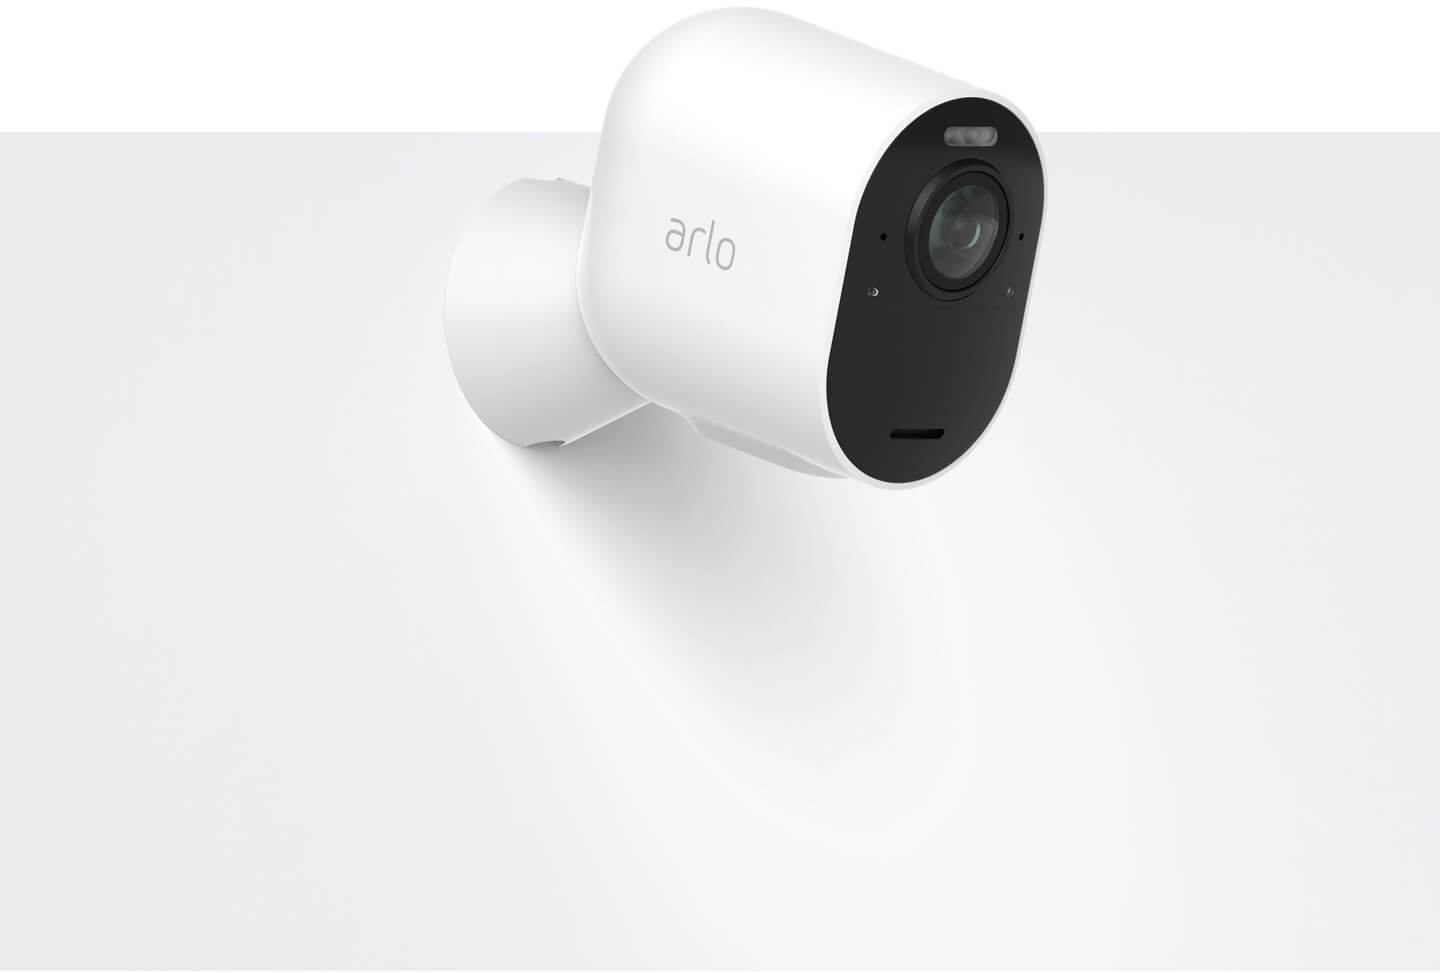 crystal clear 4k security camera